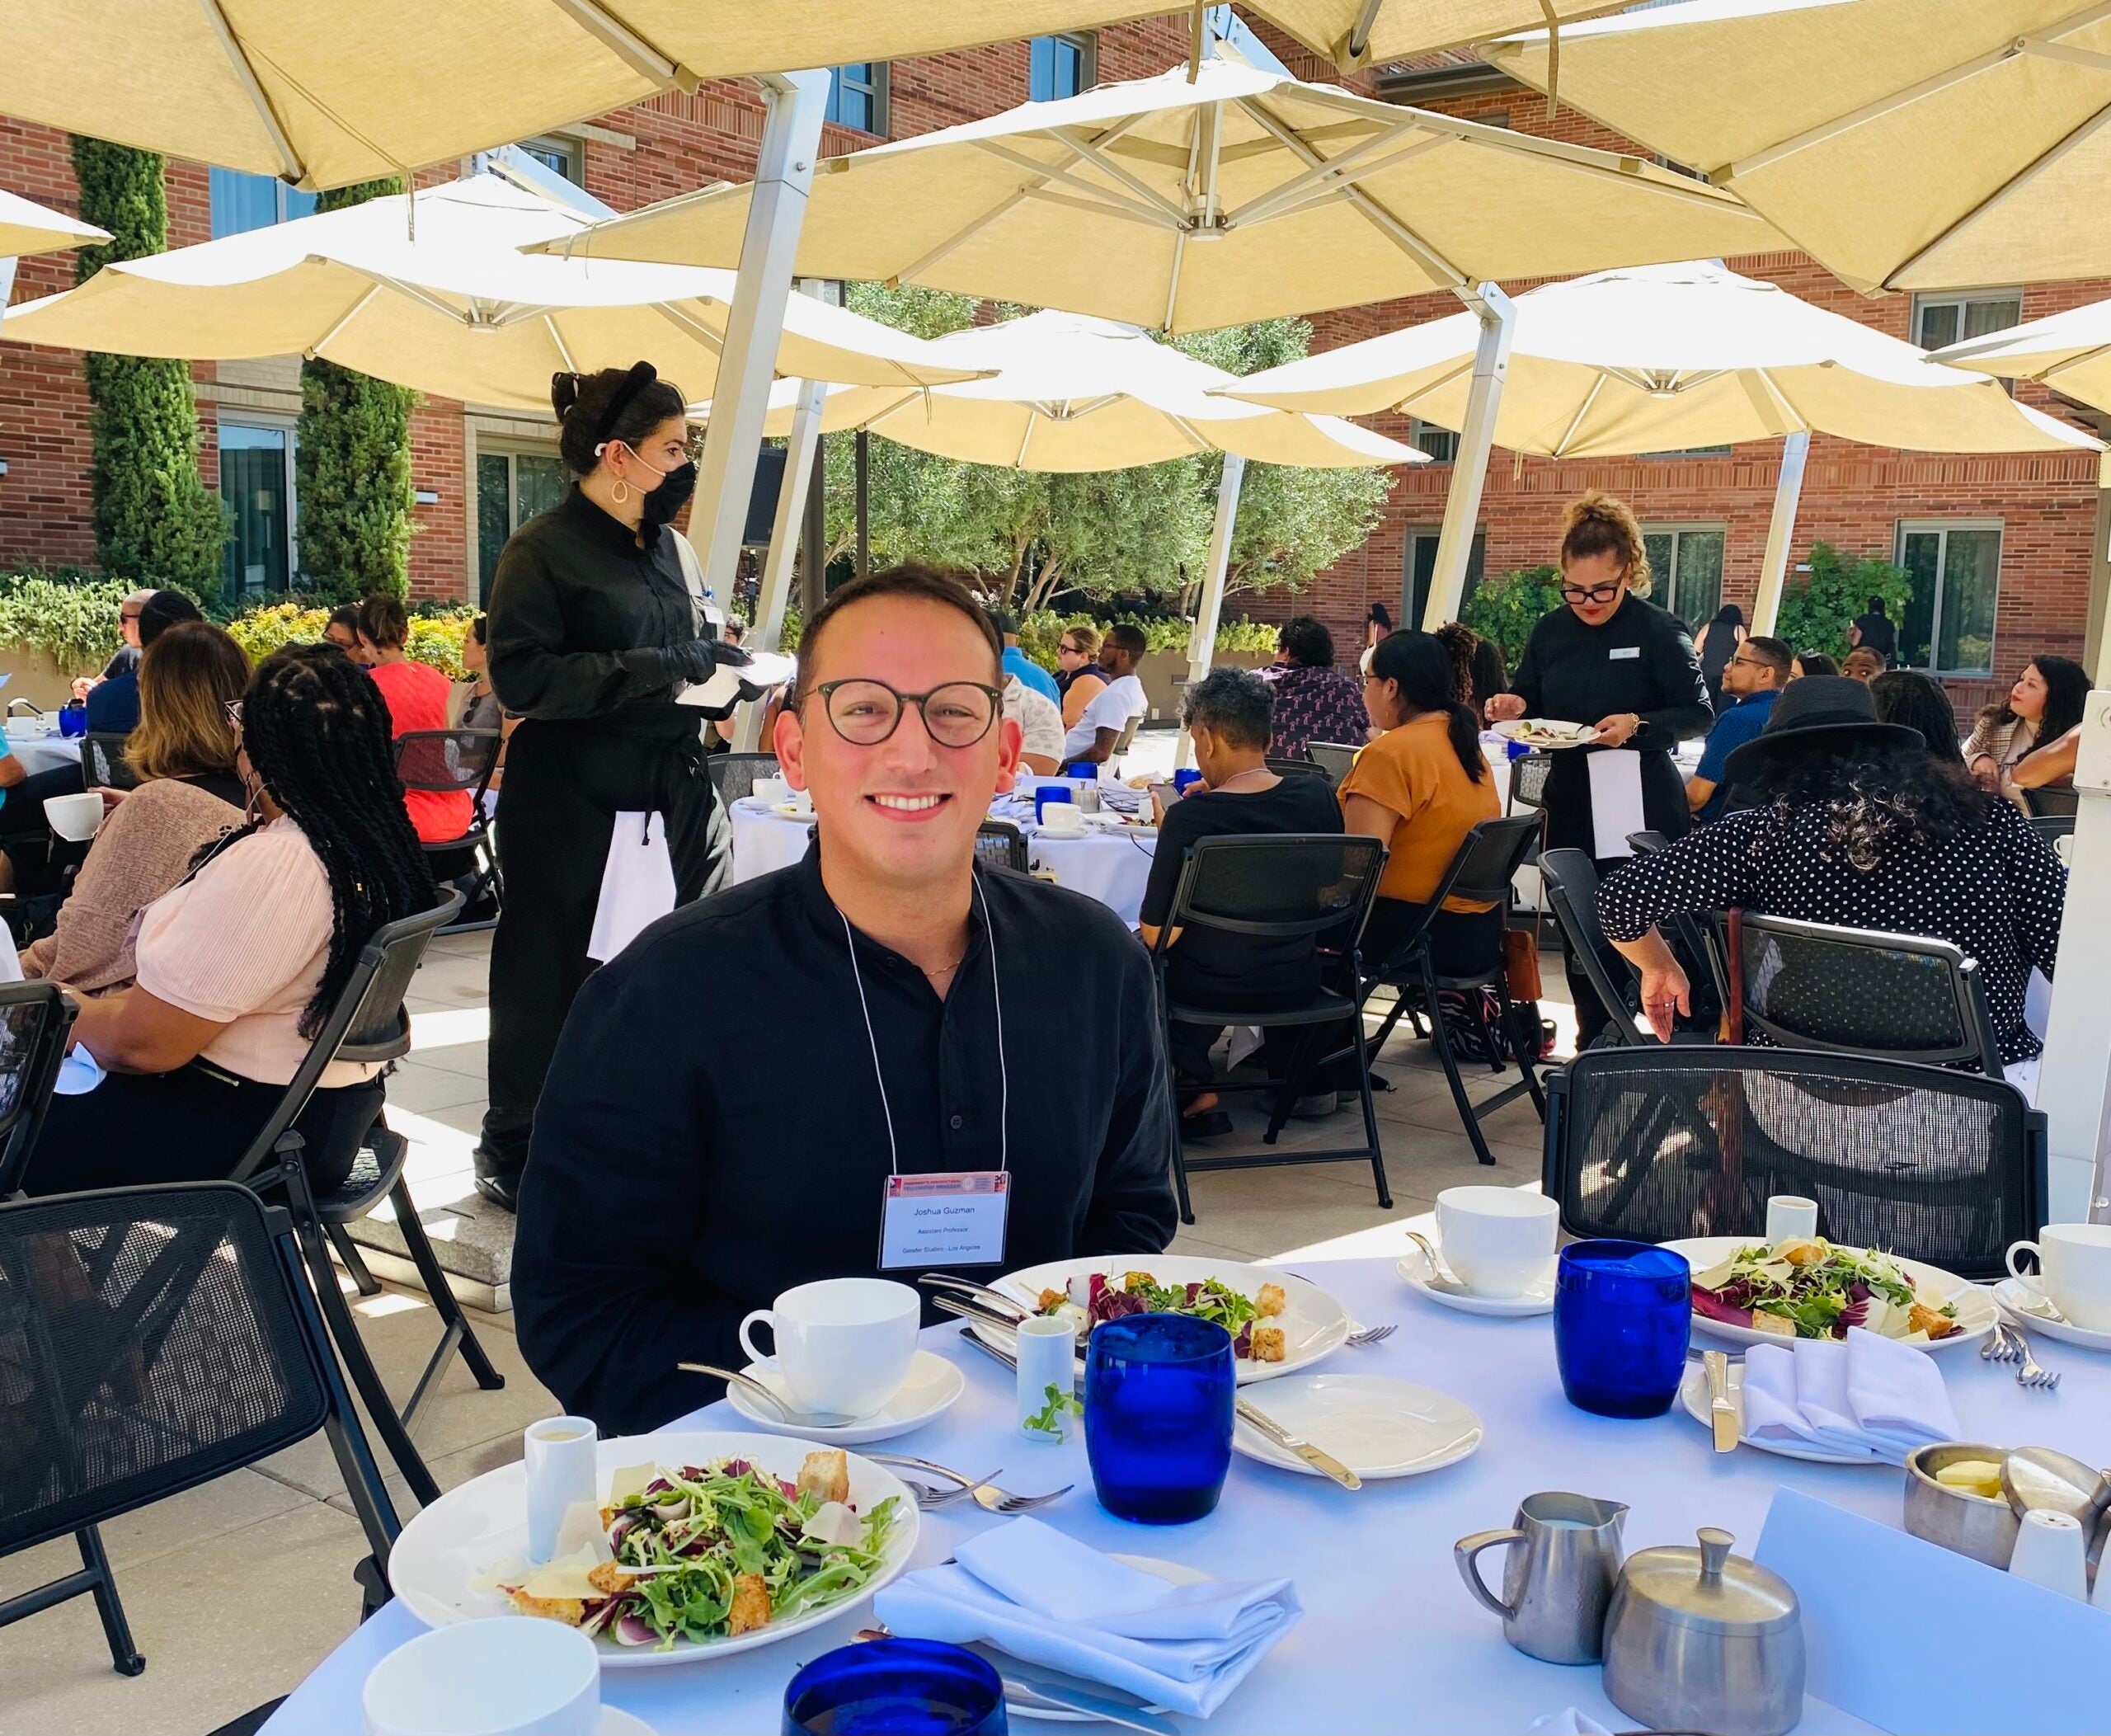 joshua javier guzmán (assistant professor of gender studies, ucla and former ppfp fellow) at the 2022 uc president’s and chancellors’ postdoctoral fellowship program kick-off luncheon for southern california